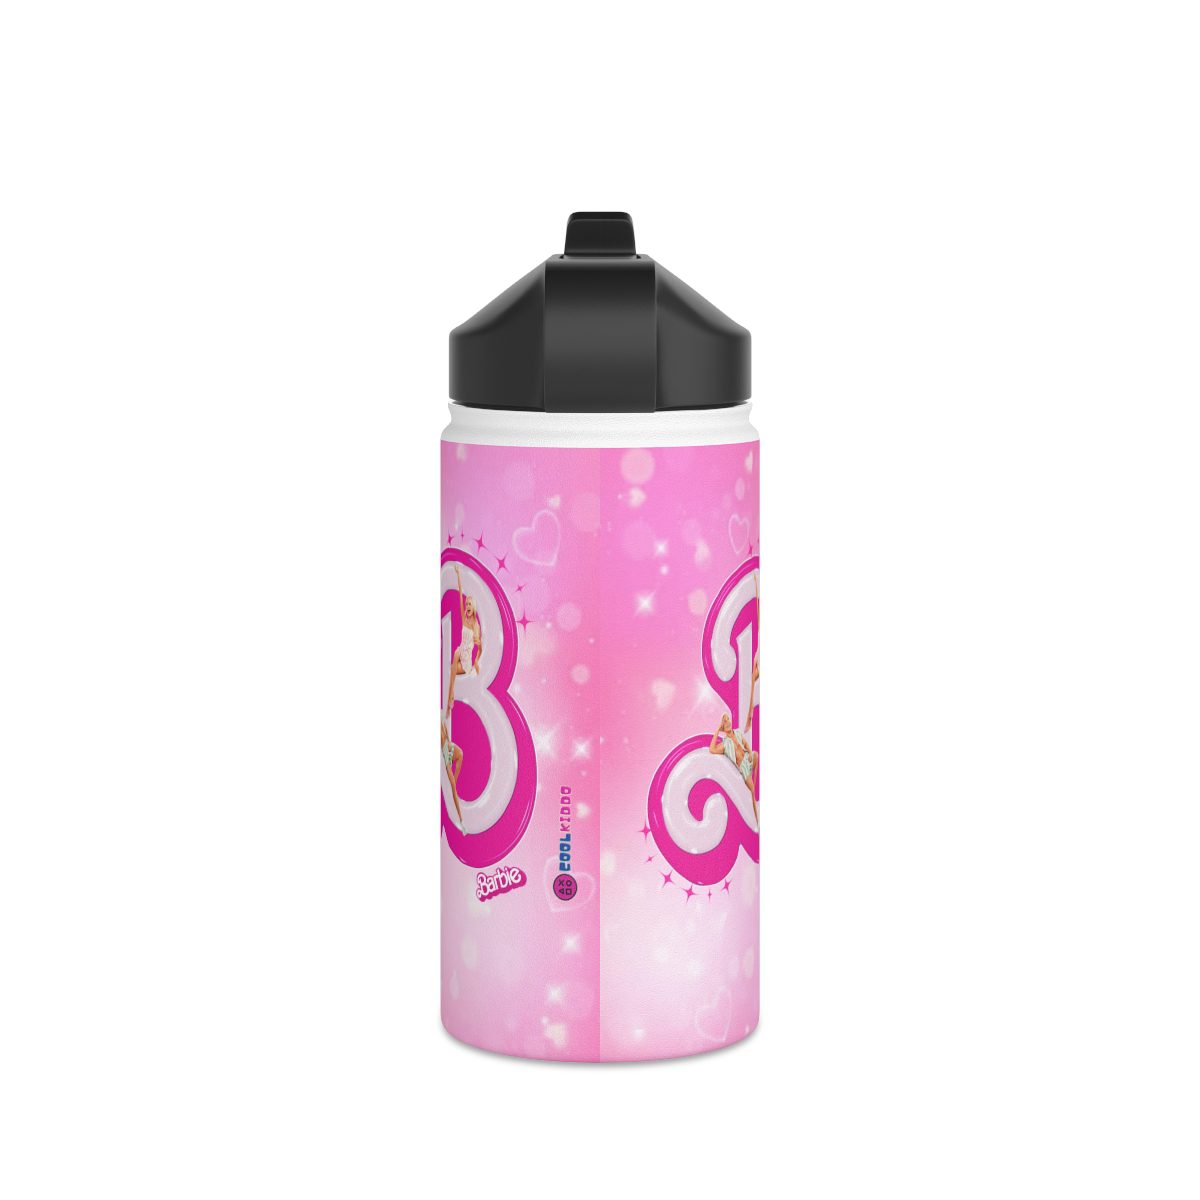 Barbie Movie 2023 Insulated Stainless Steel Water Bottle Cool Kiddo 12